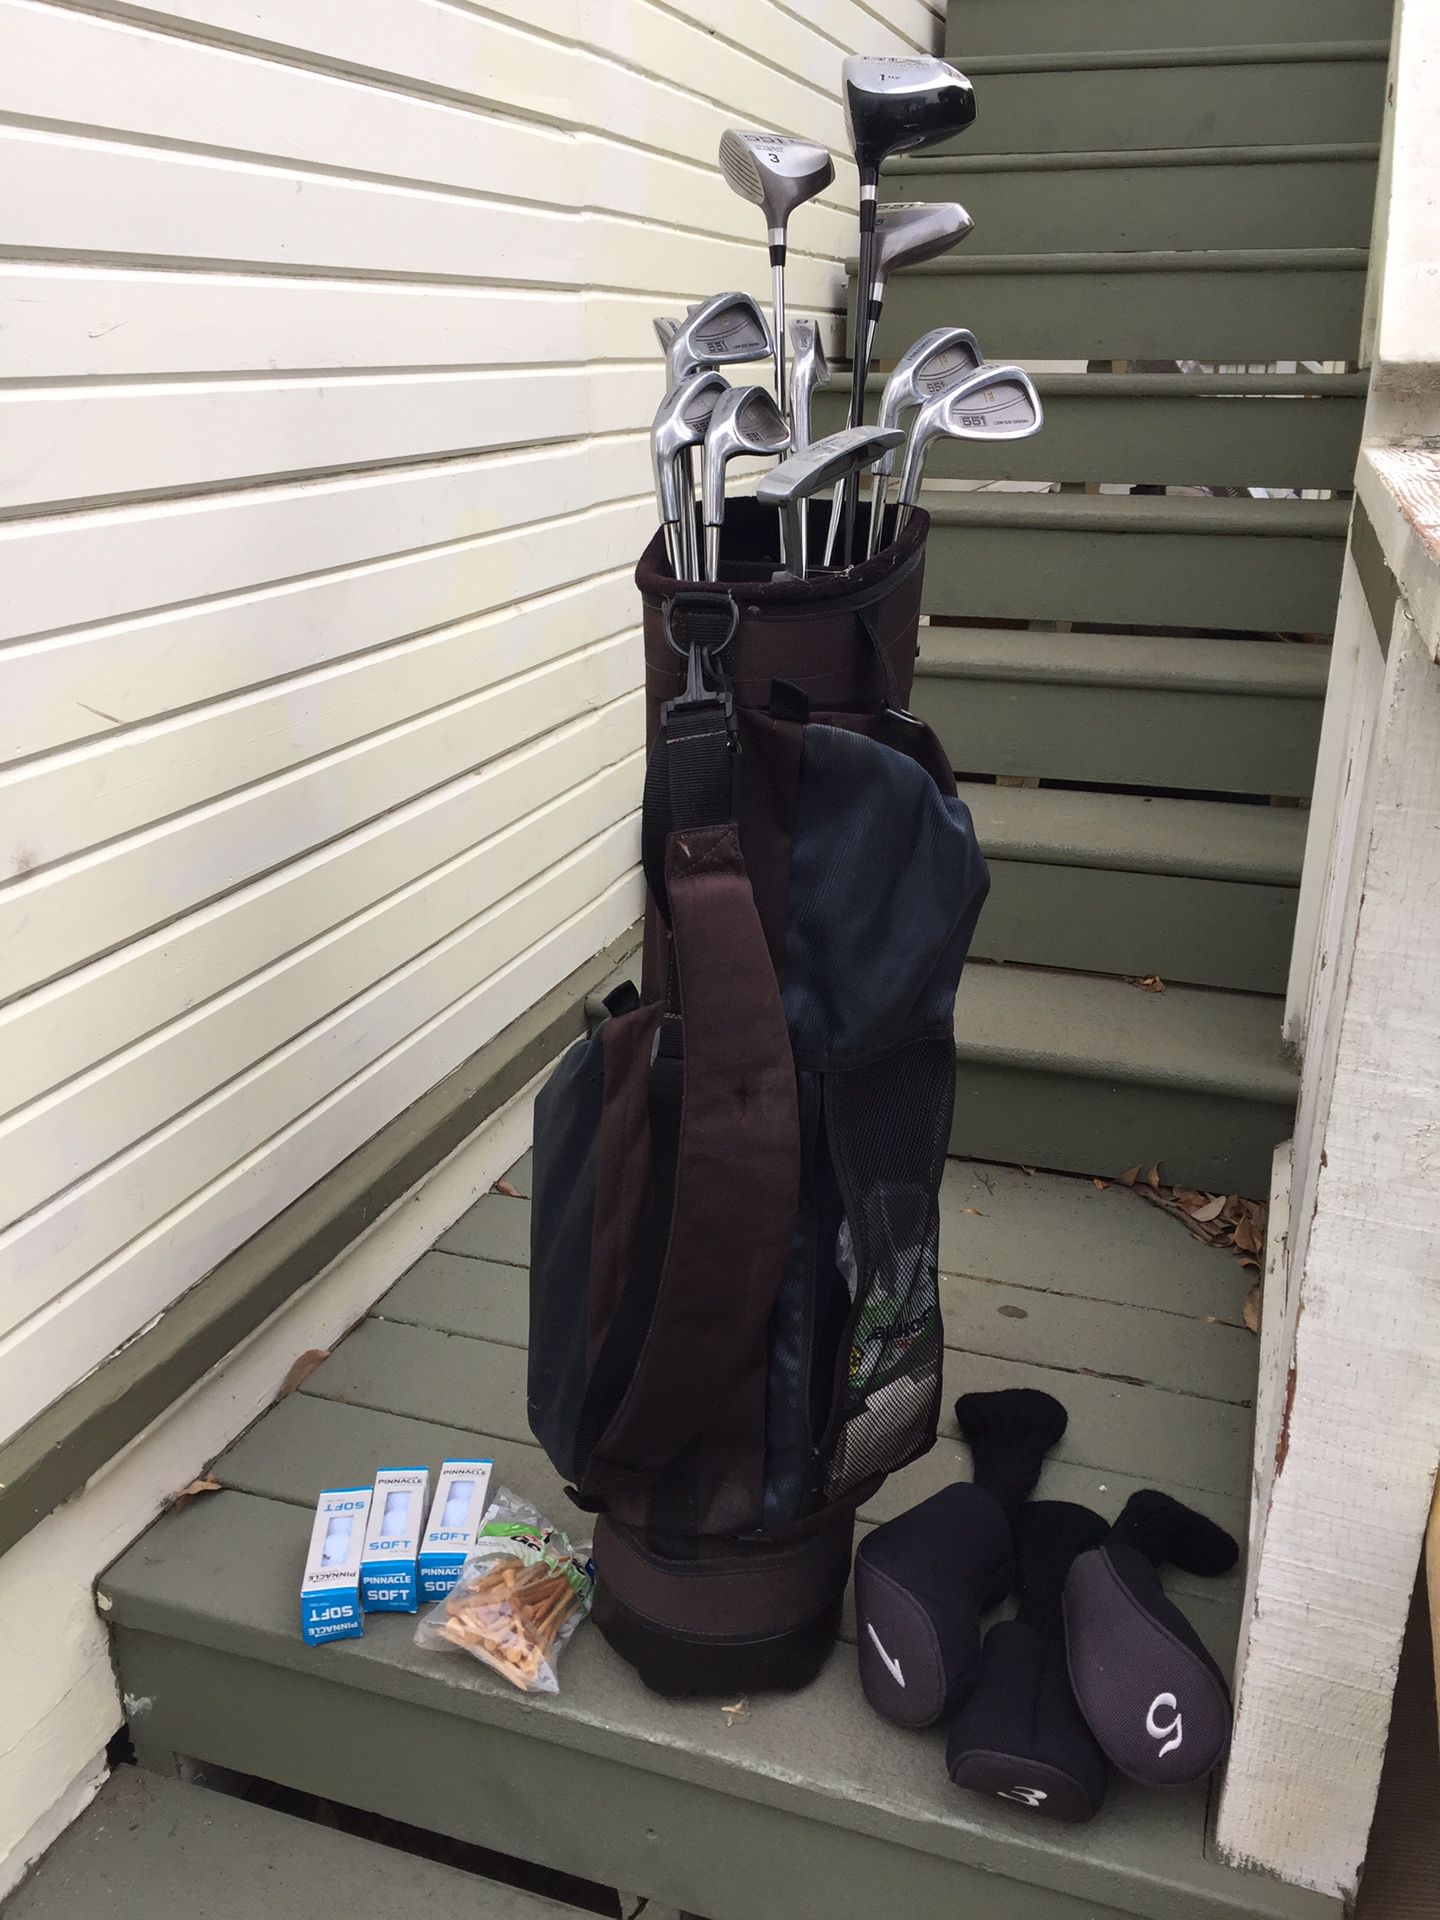 FOREMOST golf clubs, with accessories